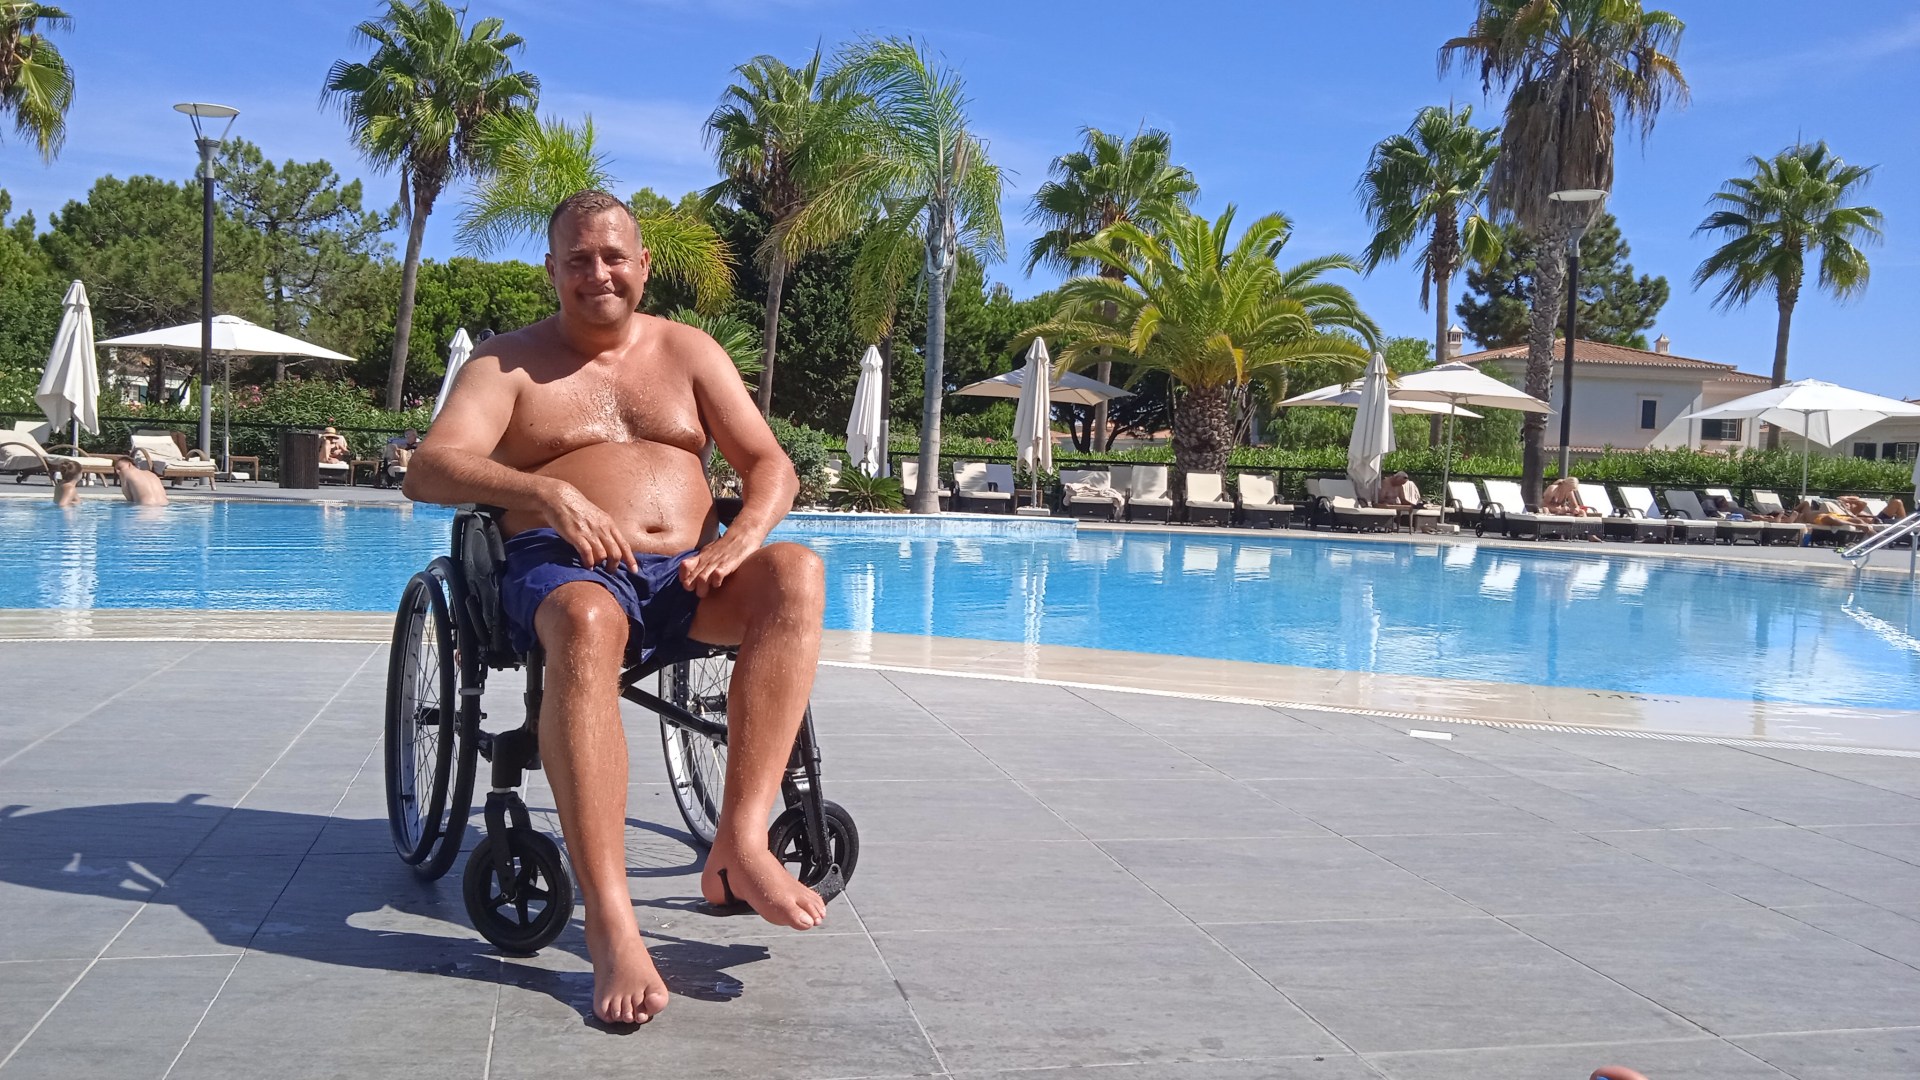 finding a wheelchair-friendly holiday is hard, but this place didn't let us down